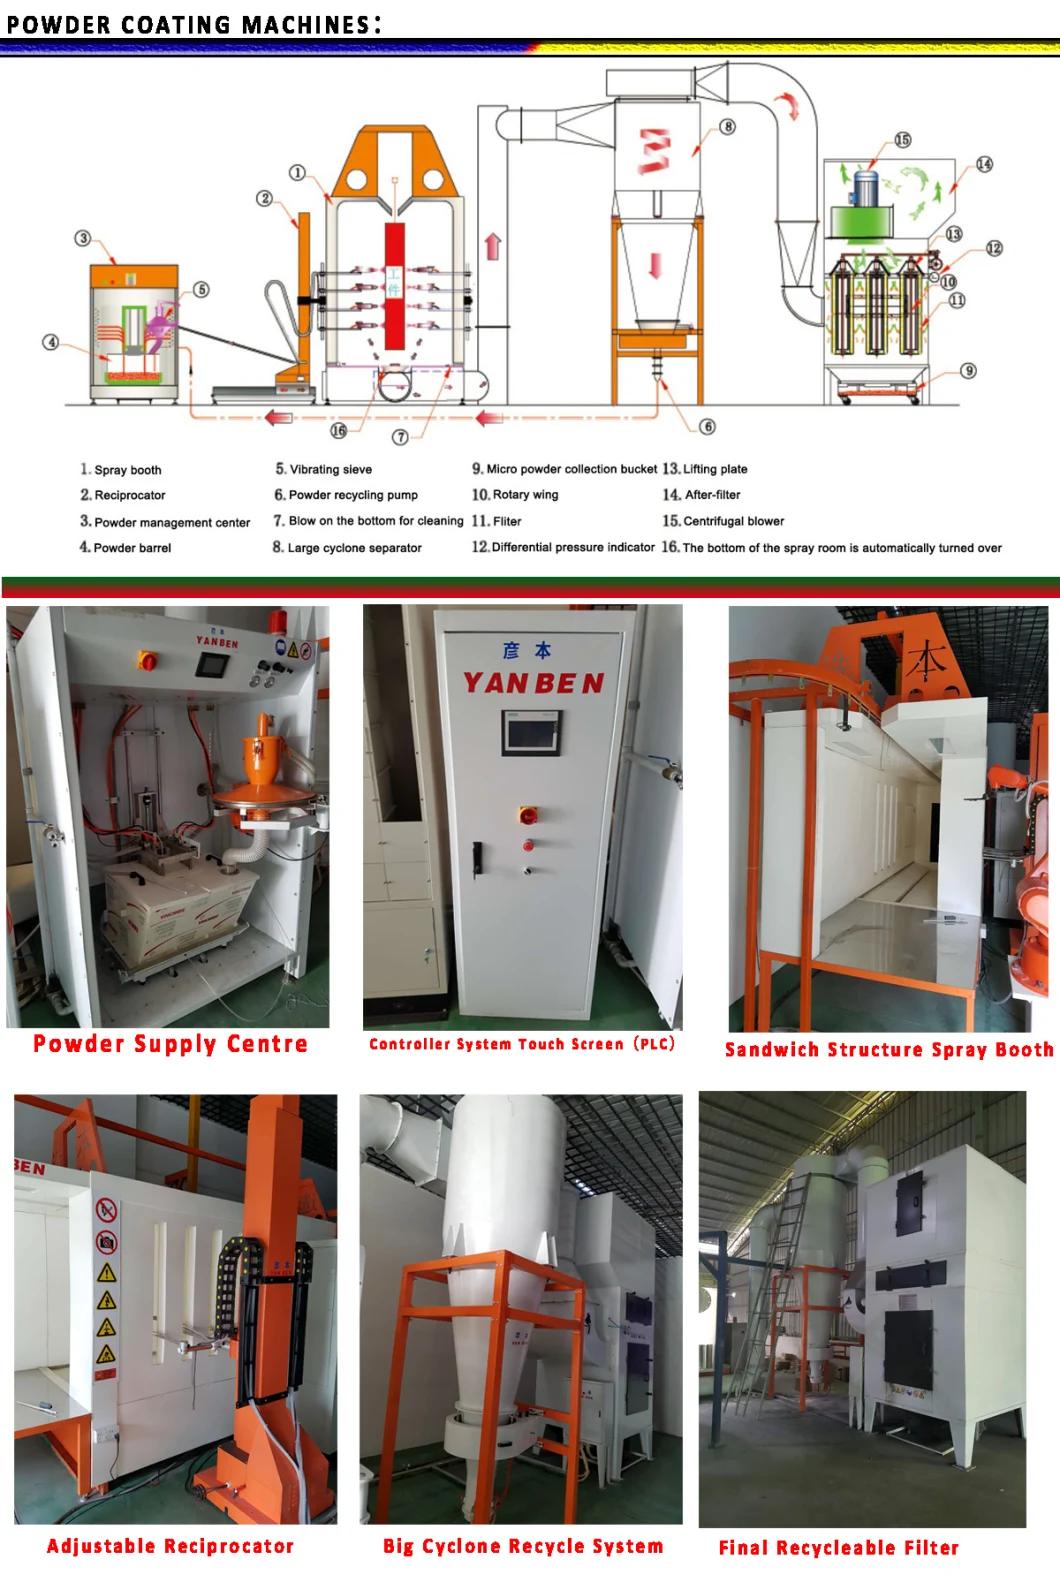 Automatic Powder Coating Equipment Reciprocator for Powder Coating Spray Booth